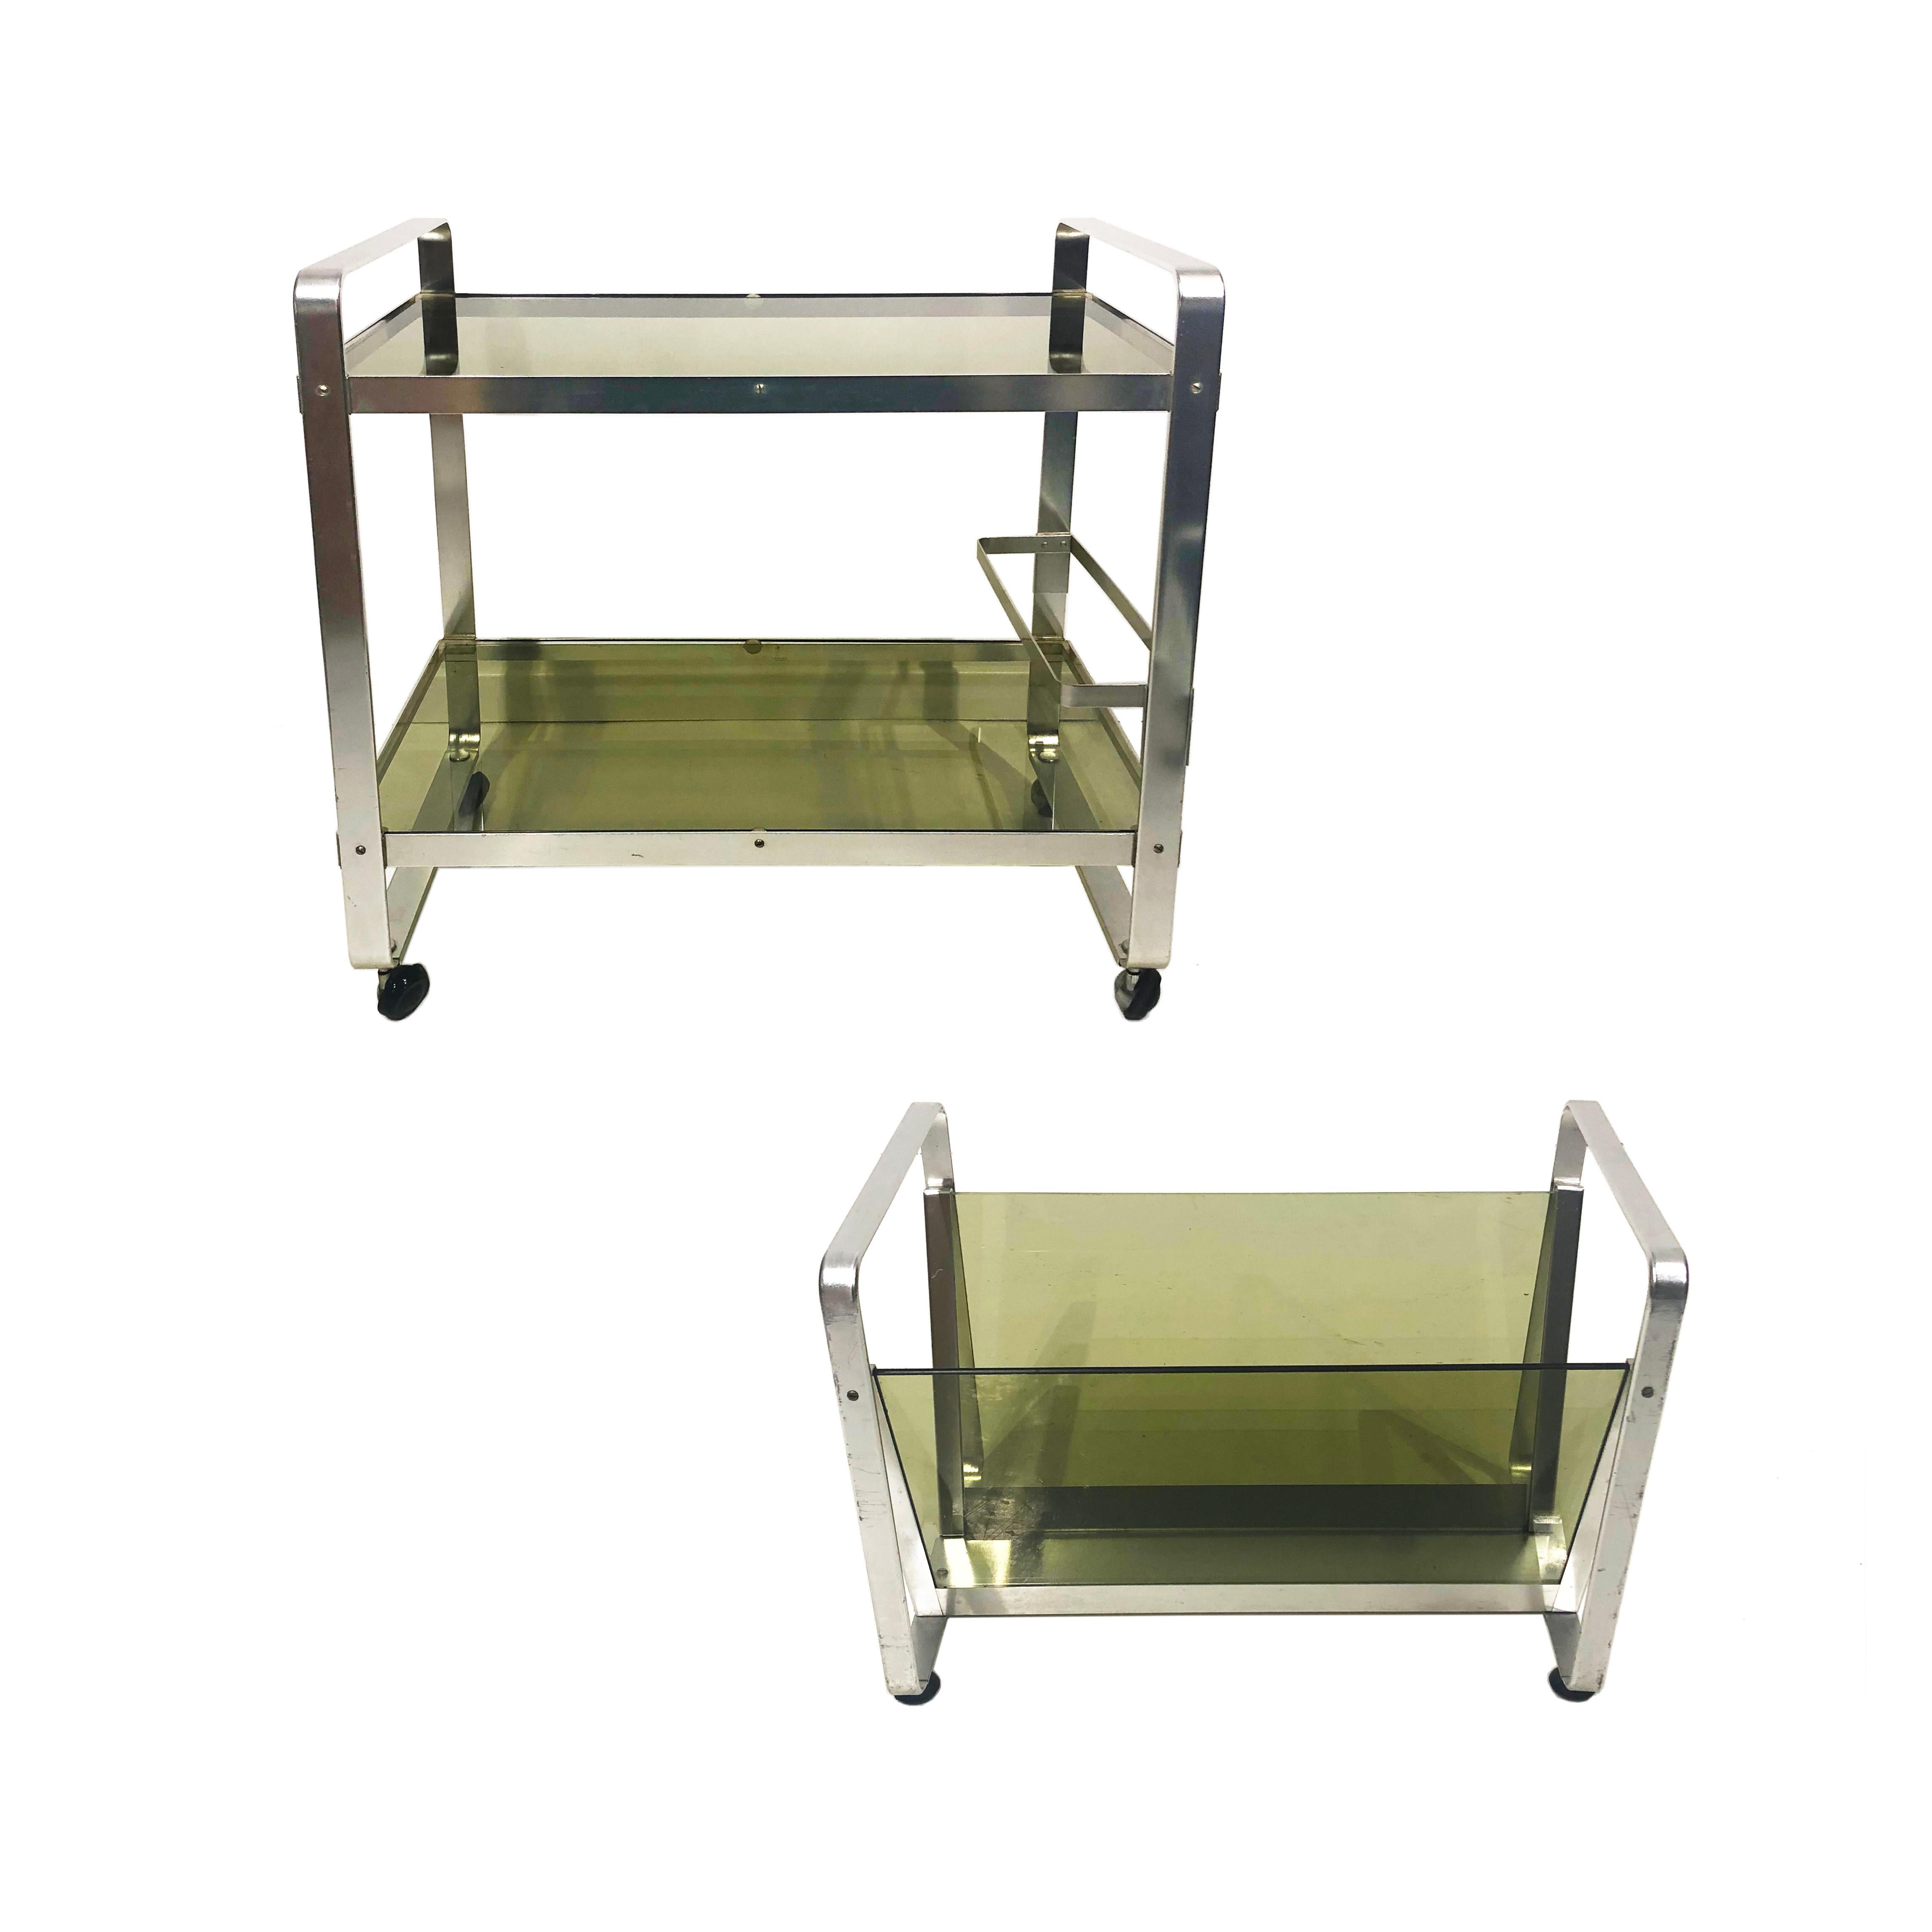 Space age drinks bar cart and magazine rack in silver aluminium bended metal frame and smoked green glass. Light weight and smooth to take around with the bottles bar changing height. The magazine rack can be used as vinyl records holder too. AV